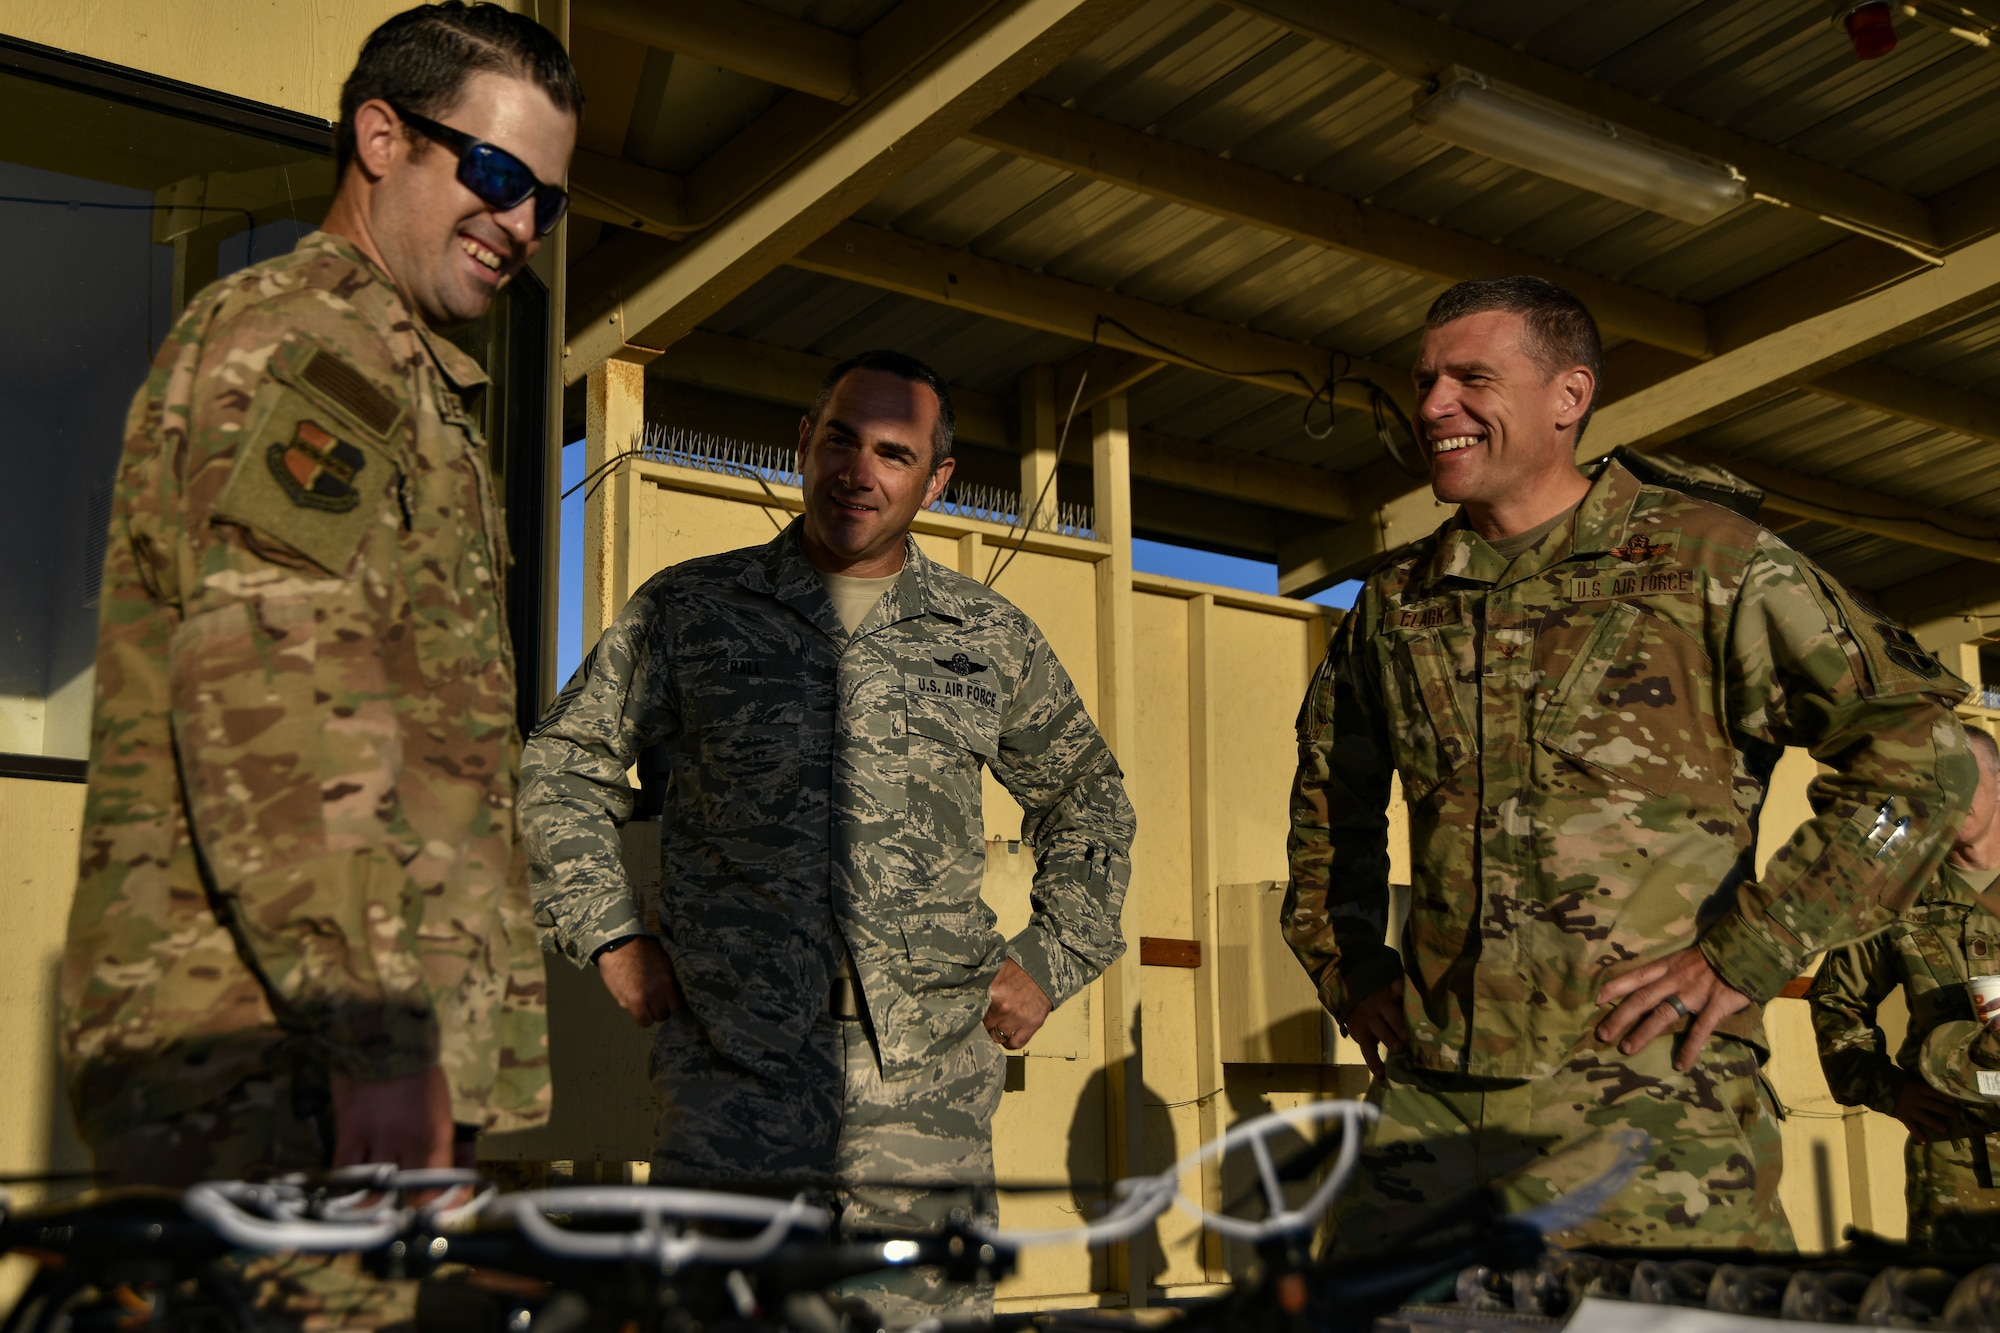 Staff Sgt. Colton Becker, 9th Security Forces Squadron training flight, gives a safety brief to Chief Master Sgt. Dustin Hall, 9th Reconnaissance Wing command chief, and Col. Andrew Clark, 9th RW commander, prior to a demonstration of the Smart Shooter sighting device at Beale Air Force Base, California, Aug. 14, 2019. The sighting device attaches to the weapon and locks on then fires to neutralize its target with or without movement. The device is also being used to limit friendly fire as the weapon cannot be fired unless it is purposely locked on. (U.S. Air Force photo by Tech. Sgt. Alexandre Montes)